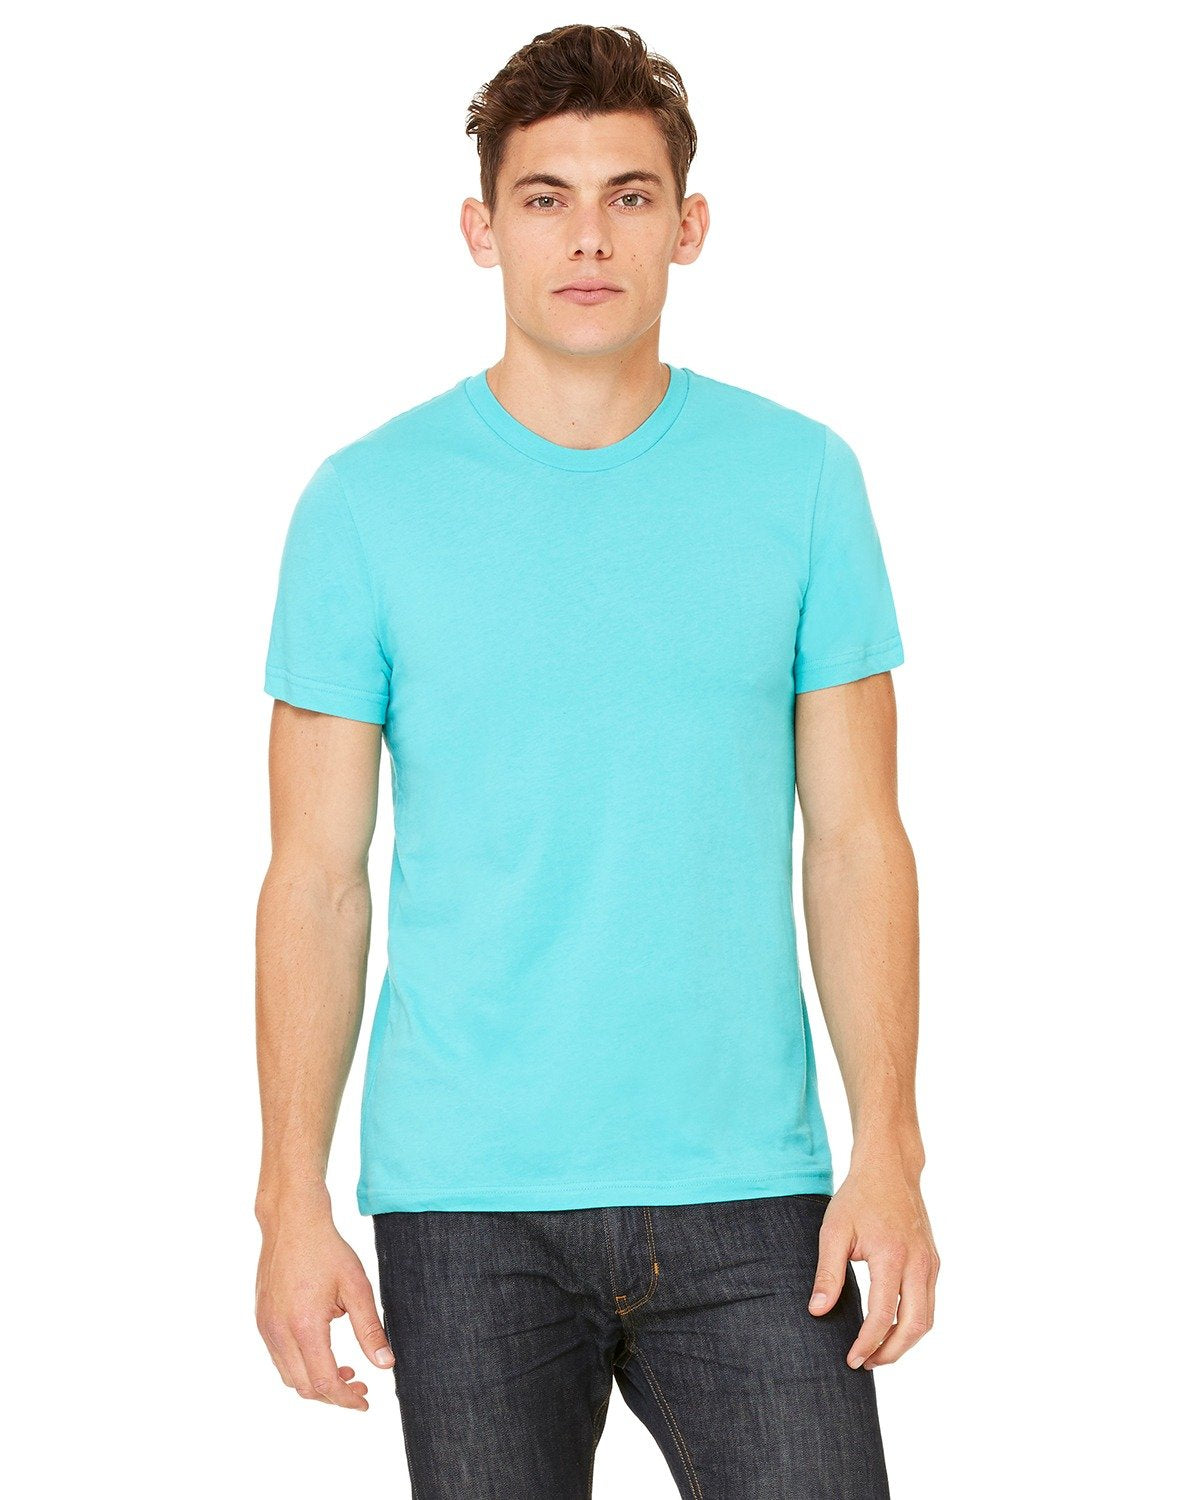 Product of Brand Bella + Canvas Unisex Jersey Short-Sleeve T-Shirt - Teal - 2XL - (Instant Savings of 5% & More)